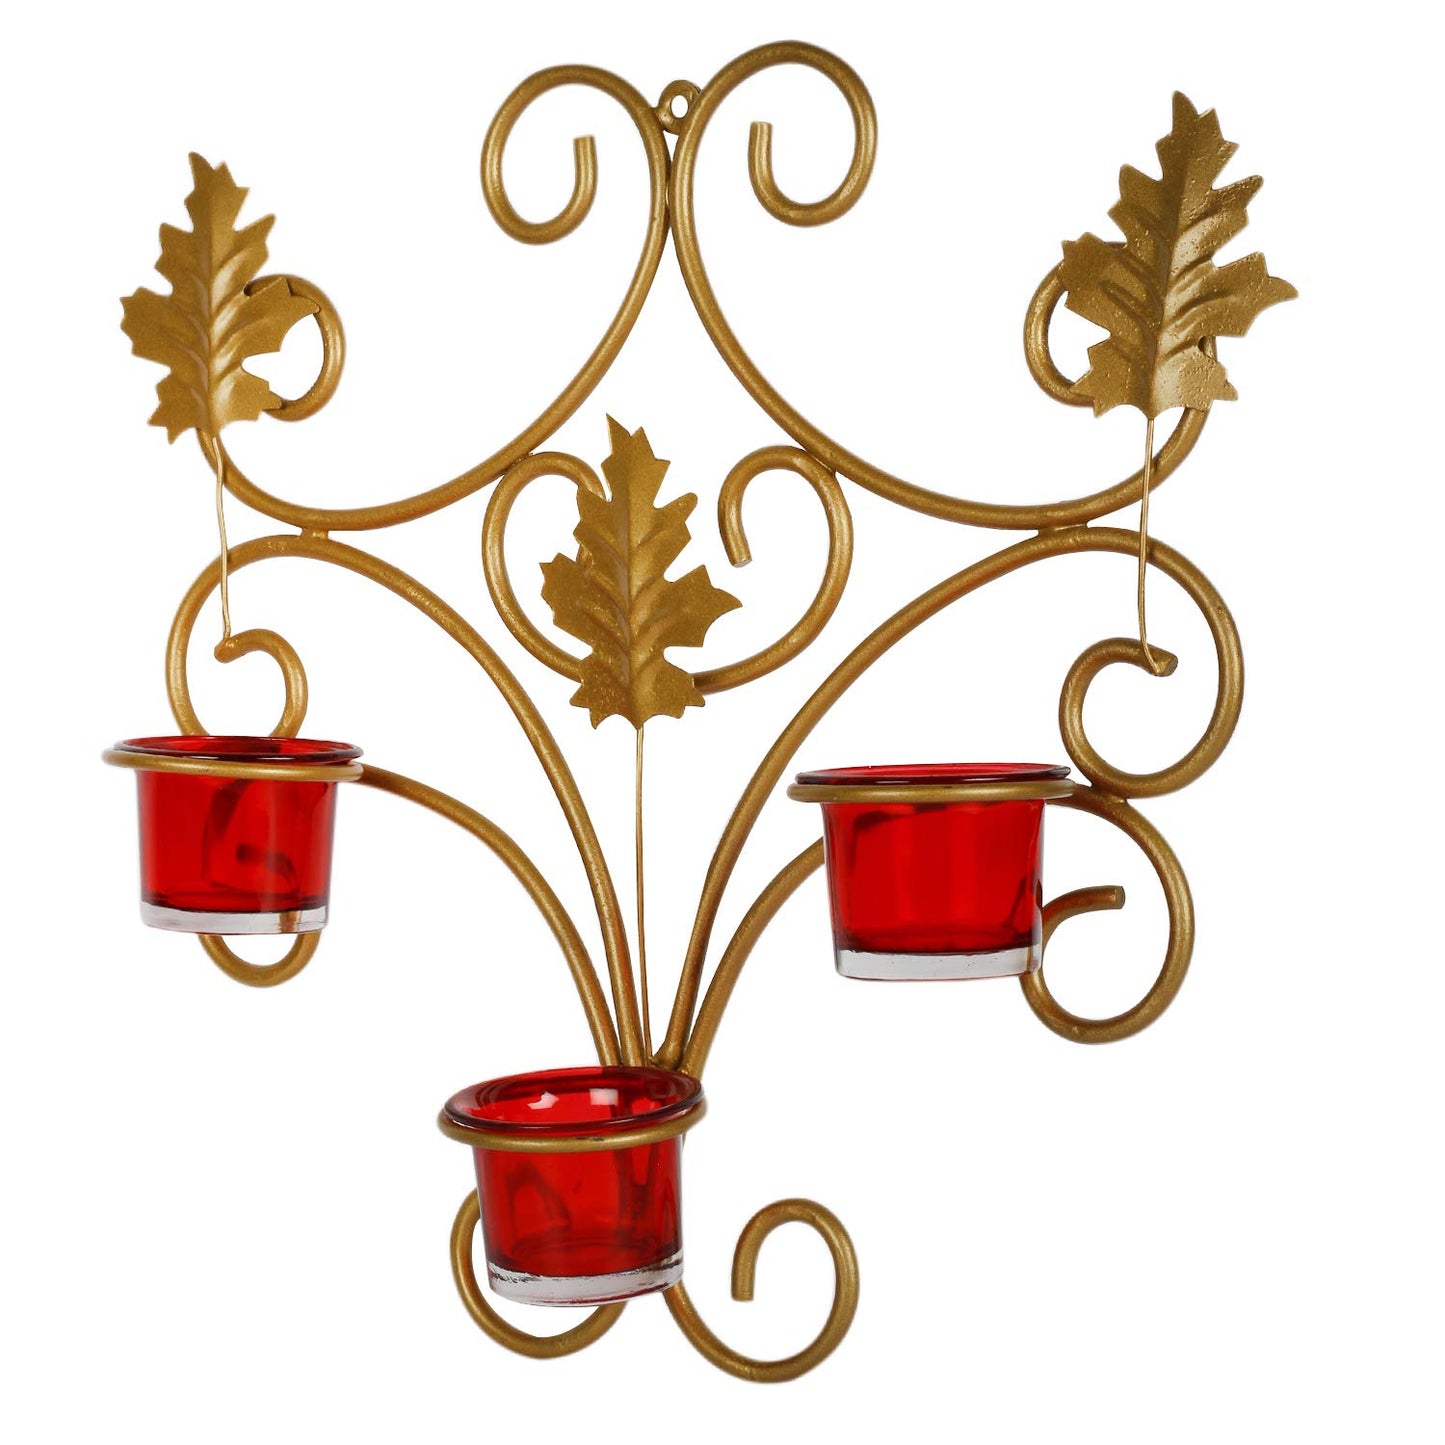 Homesparkle Wall Hanging Decorative Iron Wall Sconce Votive Candle Holder for Birthday, Diwali with Glass TeaLight Candle Stand kit for Home, Room and Mandir| Set of 1 - Candle Holder (Gold)